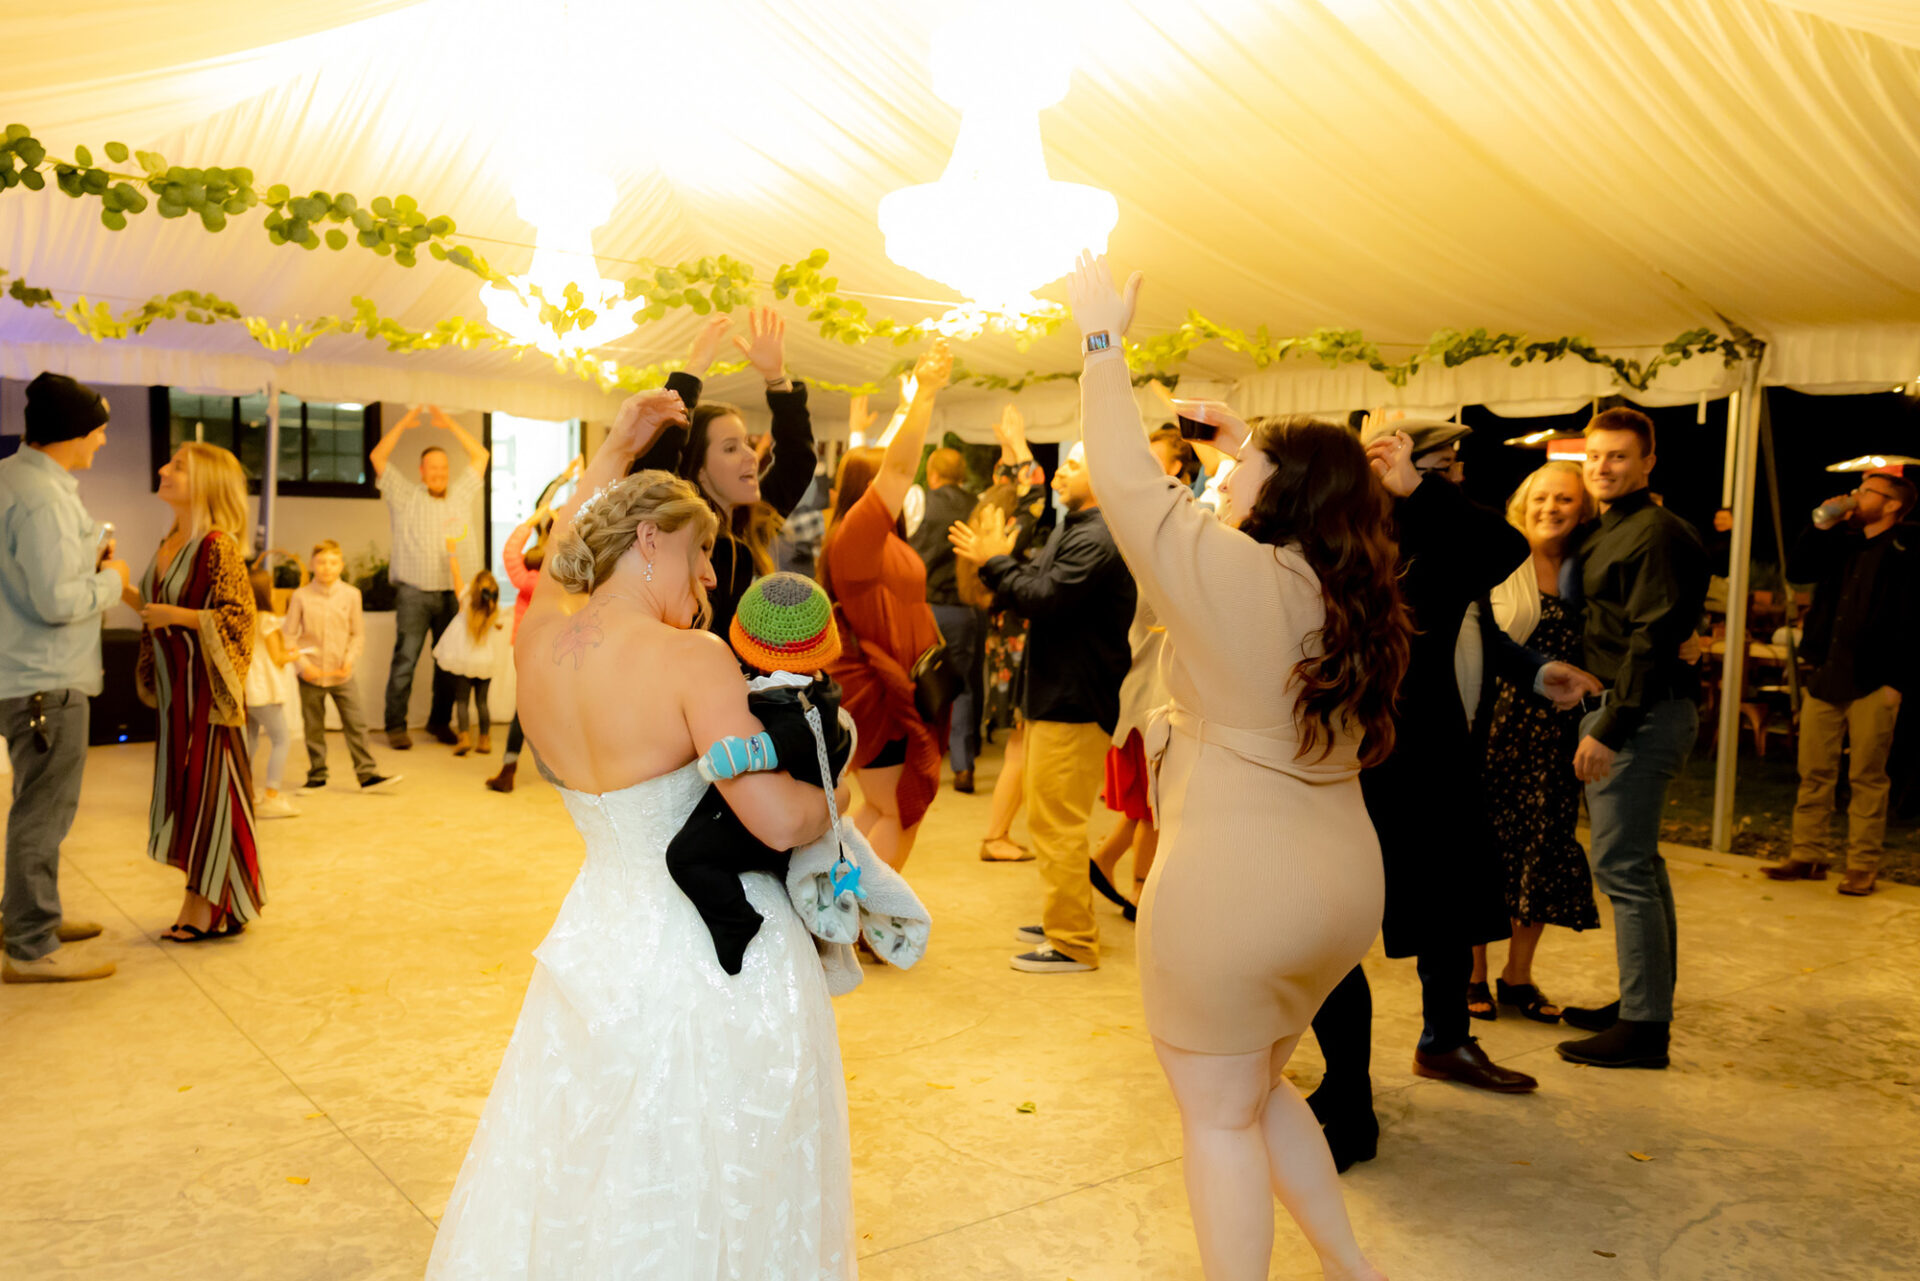 The bride dancing with the guests